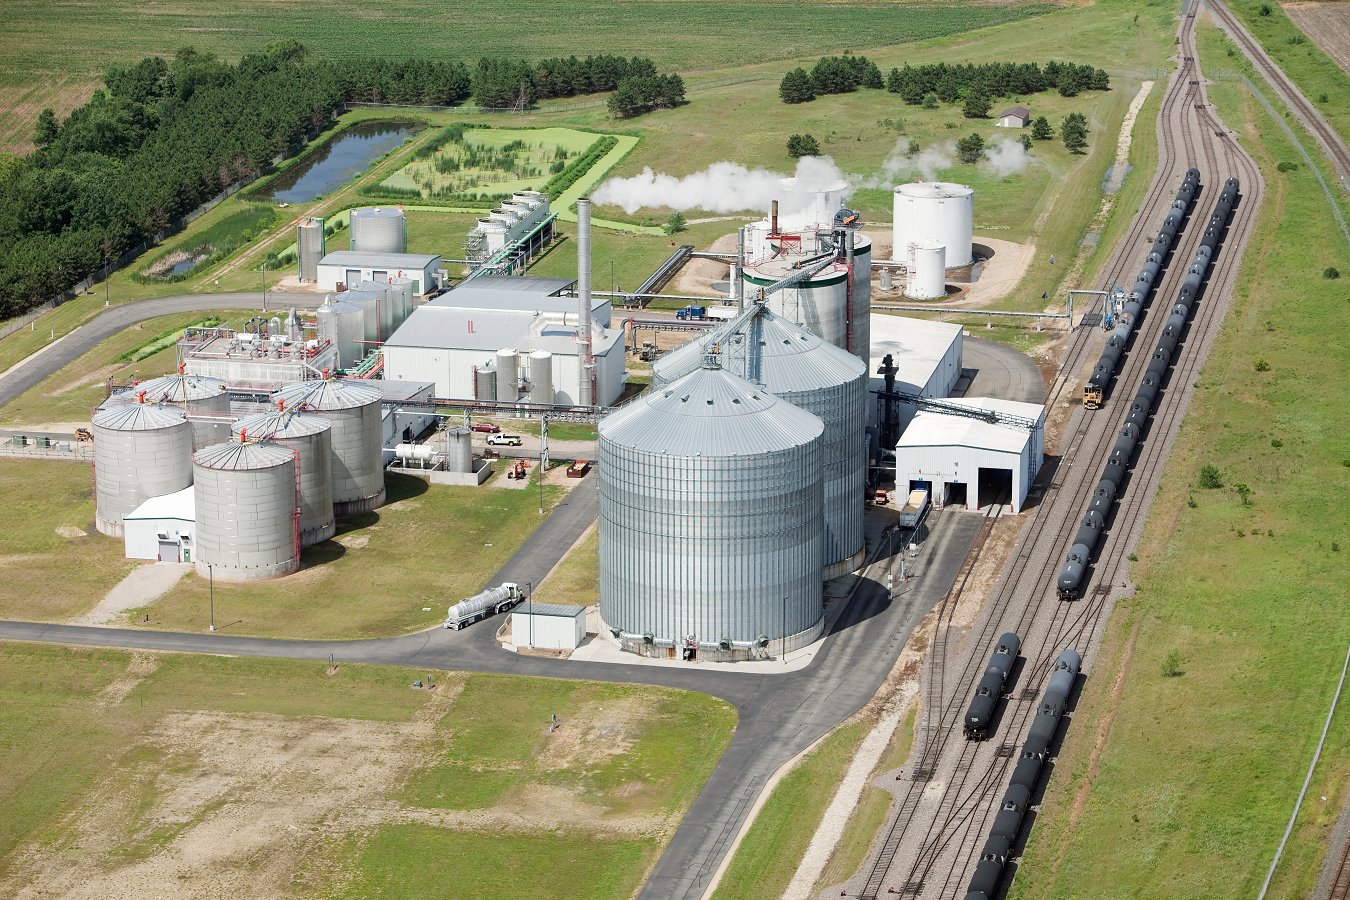 Aerial view of biofuel facility | iStock